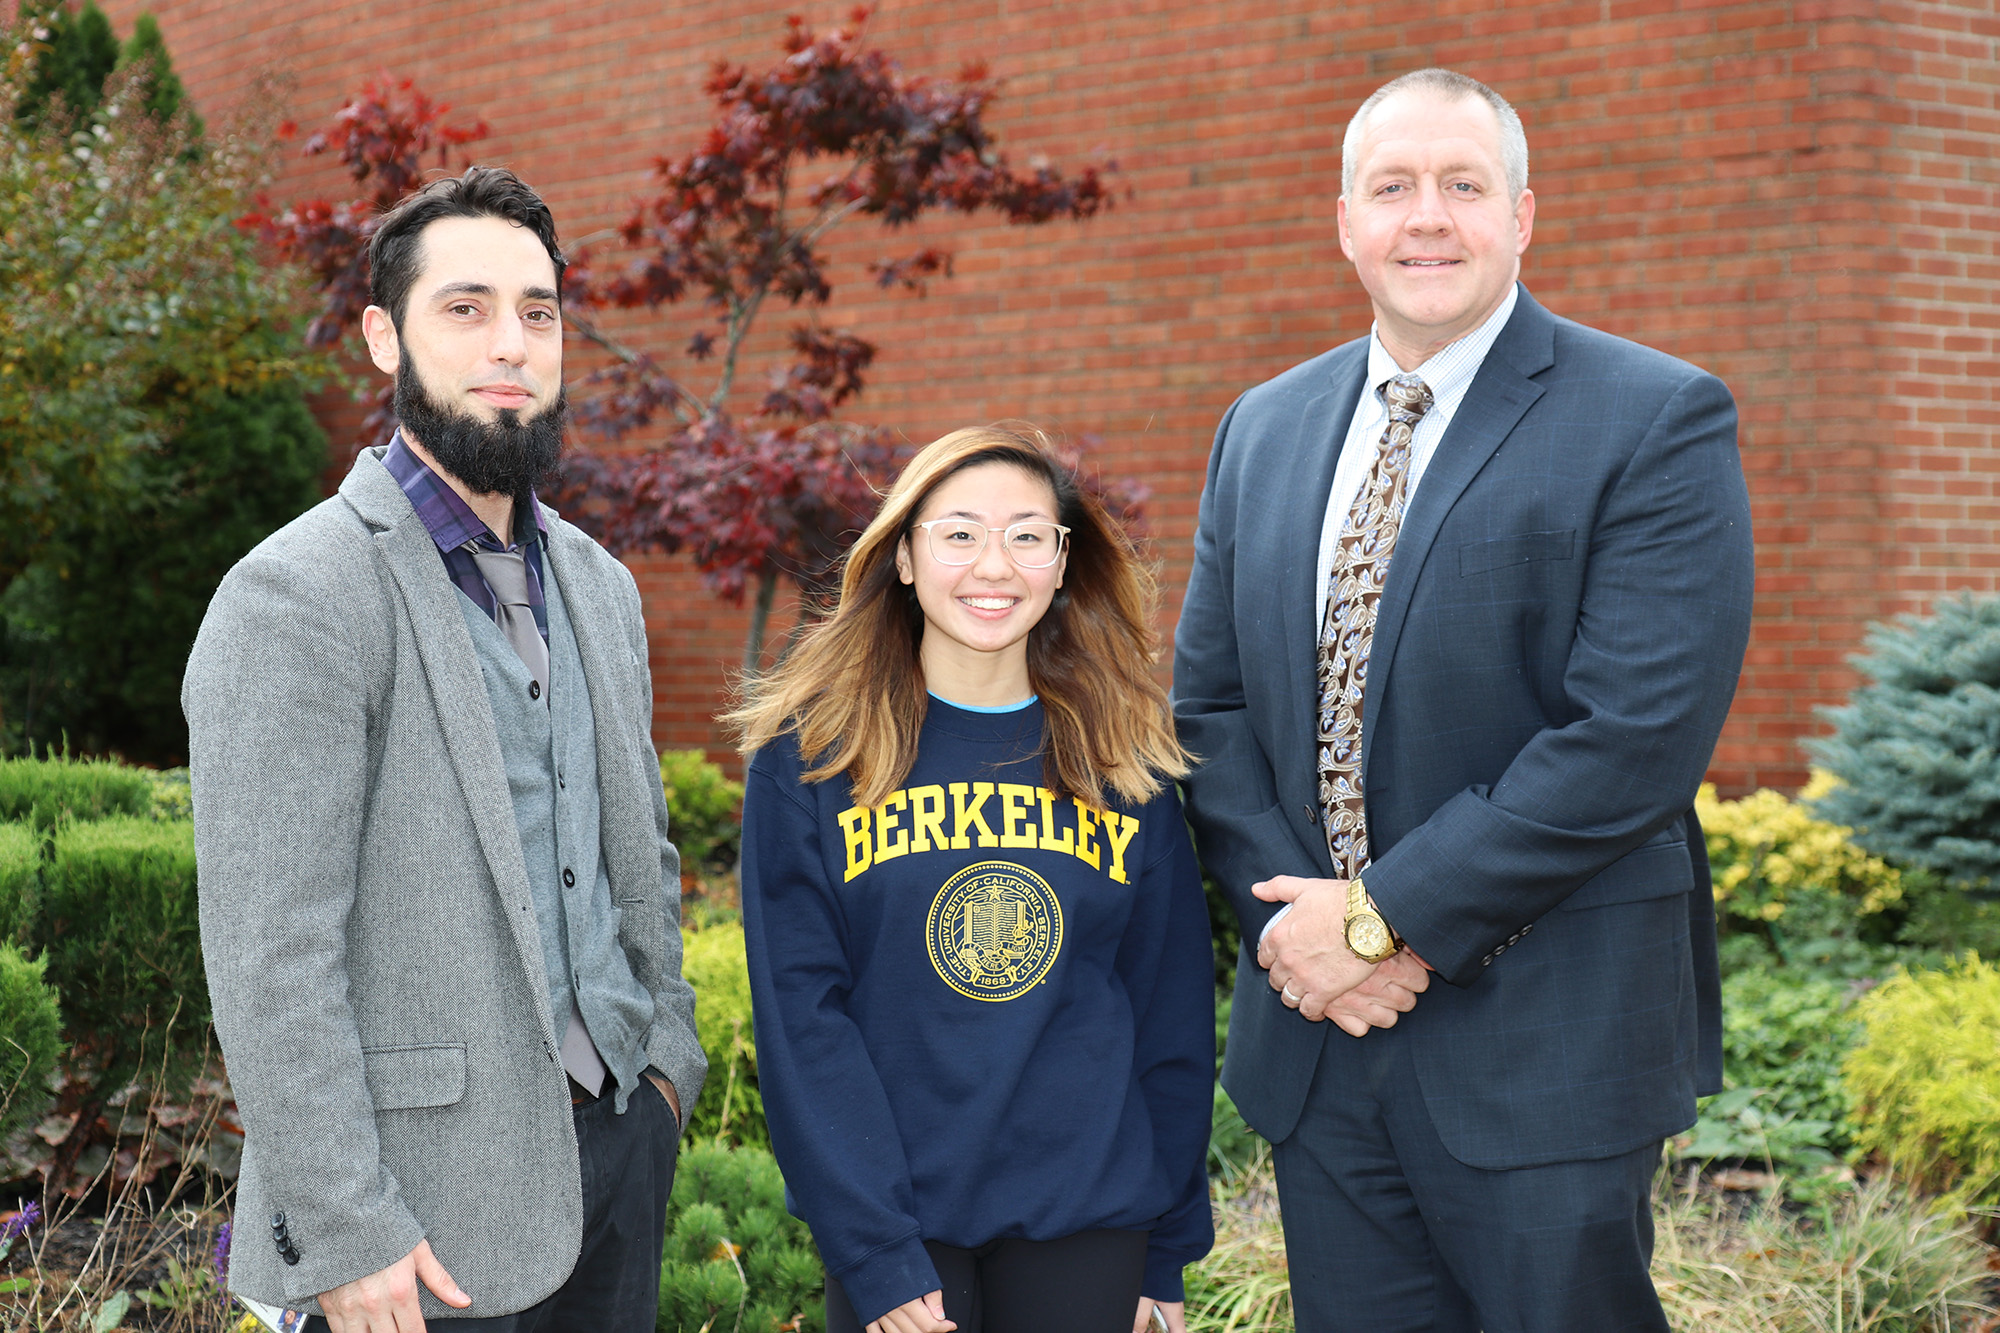 South High junior Sara Jhong is congratulated by her AP English Language and Composition teacher Michael Moran, and South High Principal Christopher Gitz. (Photo courtesy of the Great Neck Public Schools)